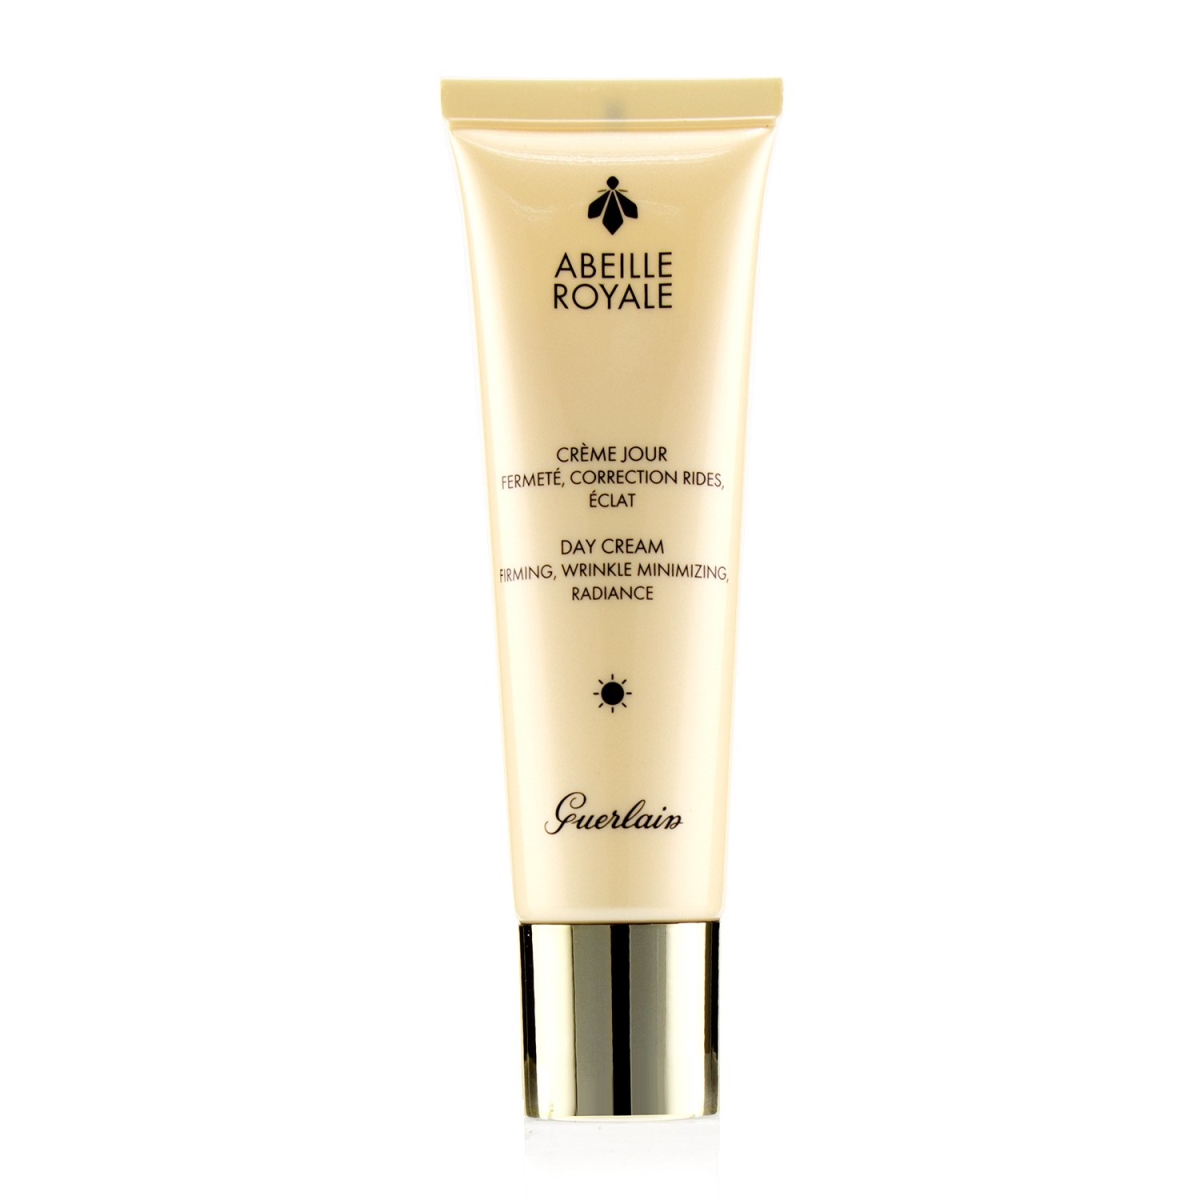 121046 1 oz Abeille Royale Day Cream for Normal to Combination Skin -  Guerlain